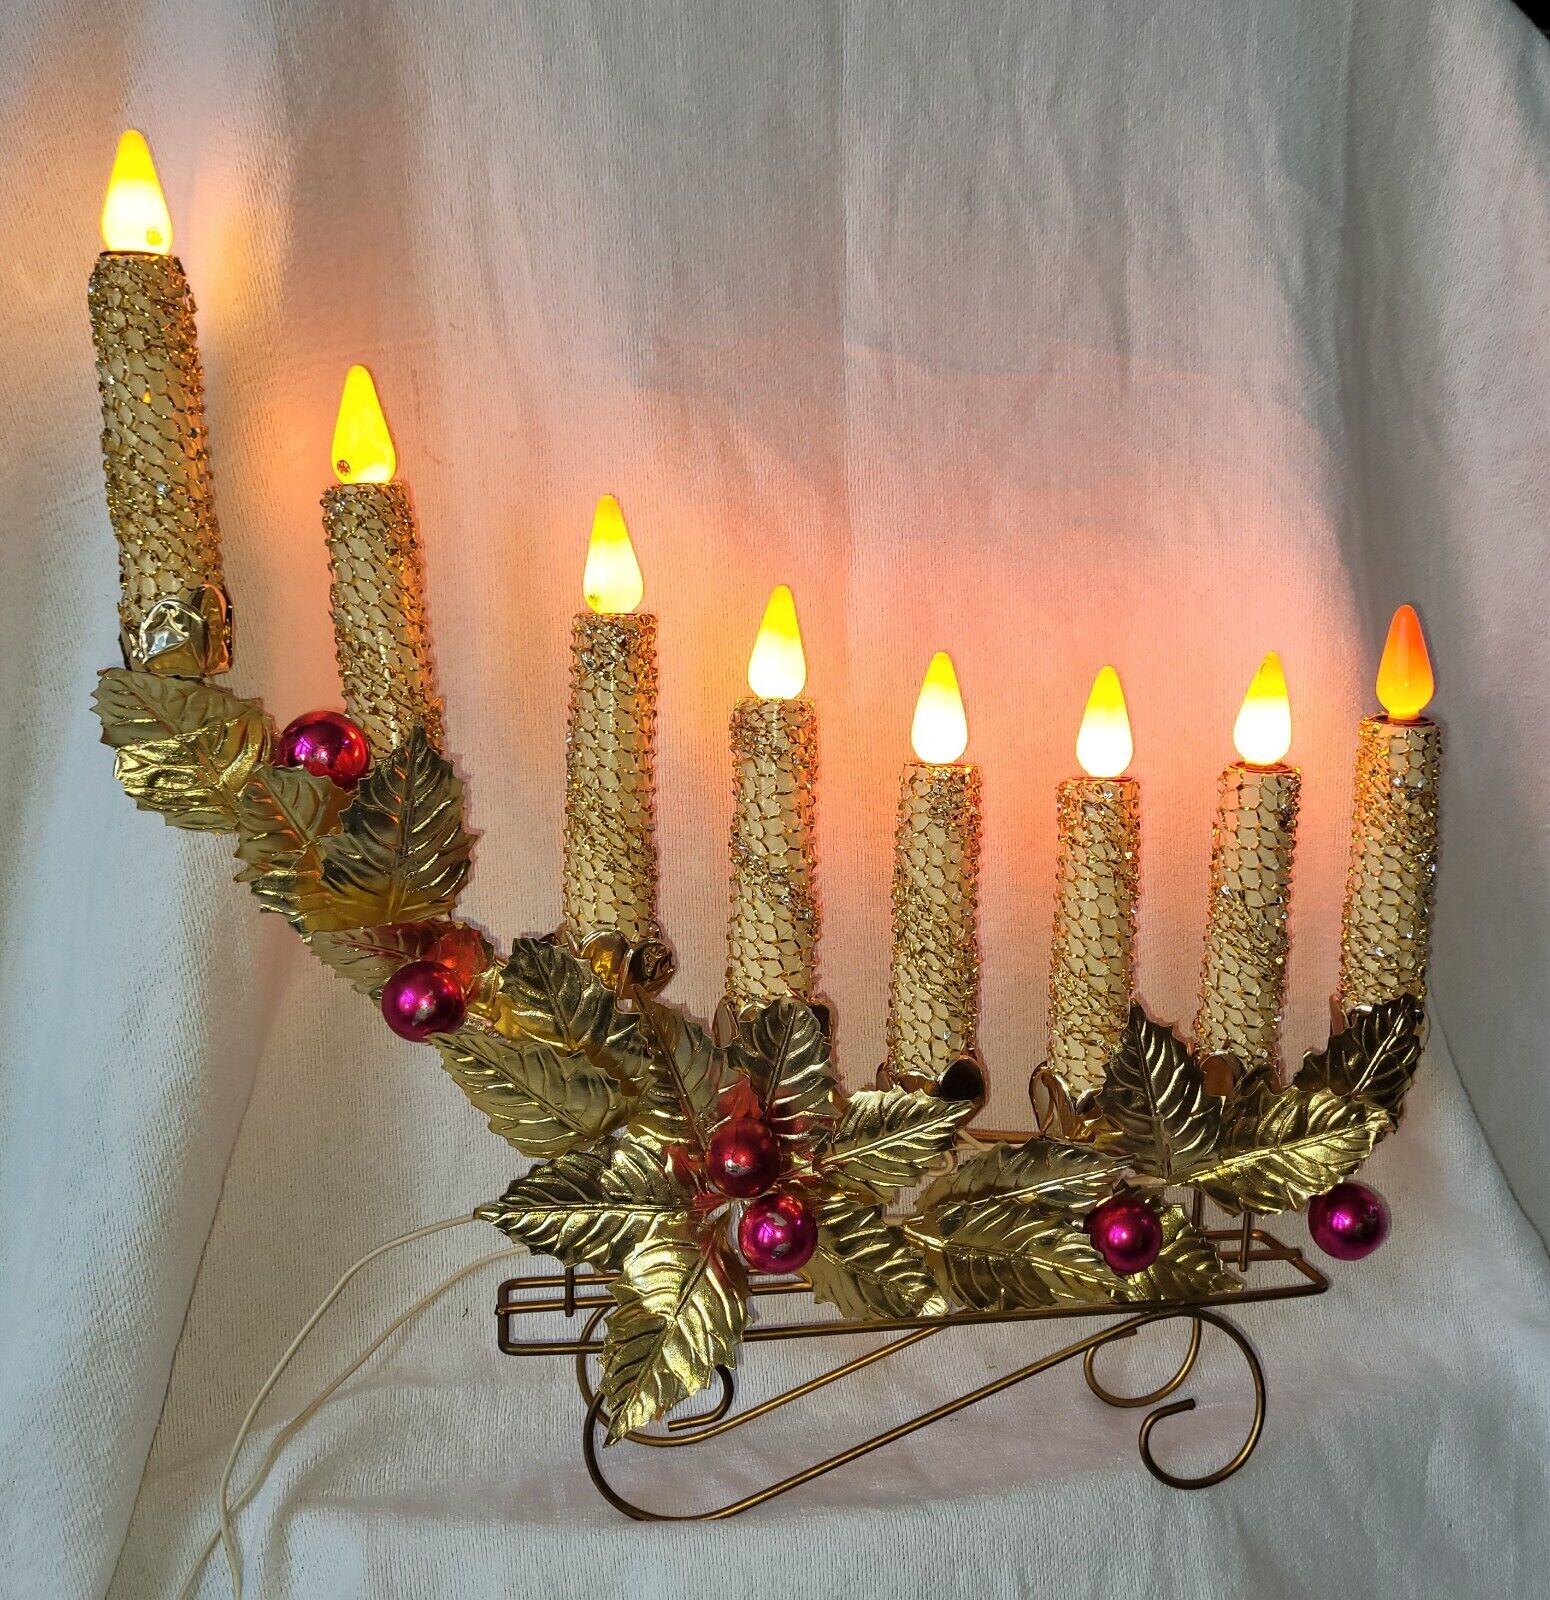 Vintage 1959 Mirostar Products Gold Mesh 8 Lighted Candles Candolier Candelabra